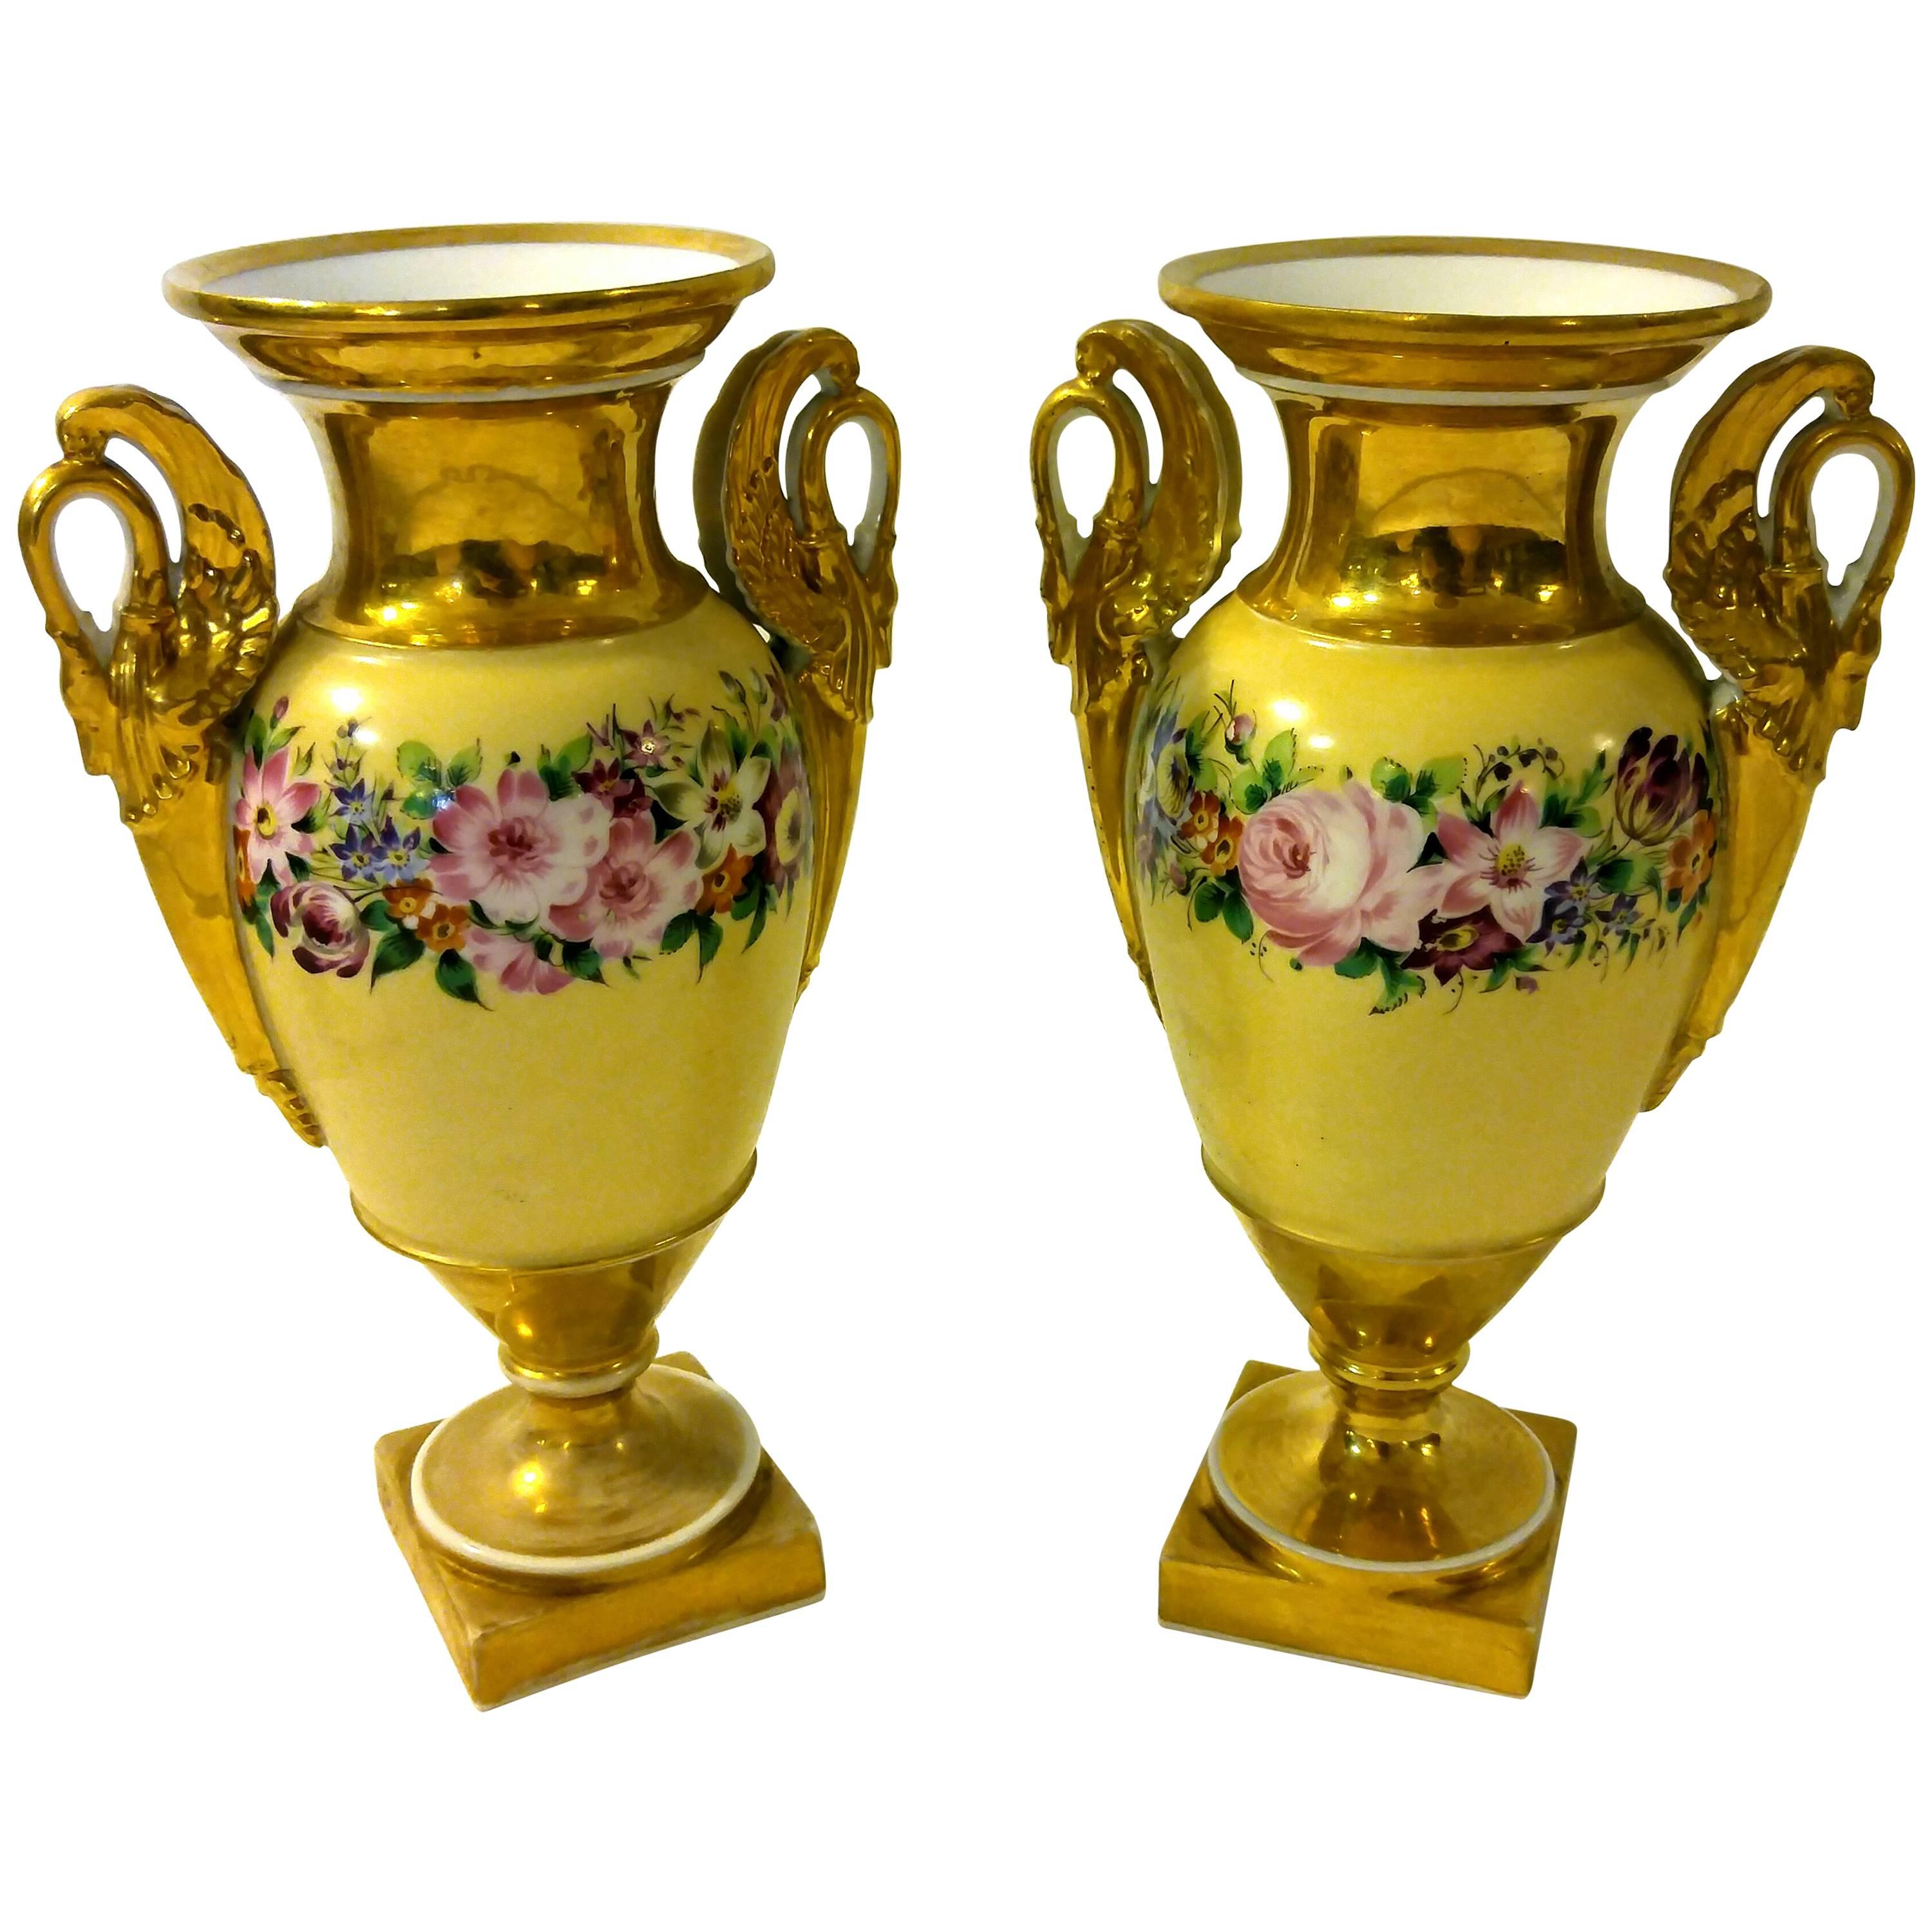 19th century Old Paris Porcelain Urn Pair with Swan Handles For Sale